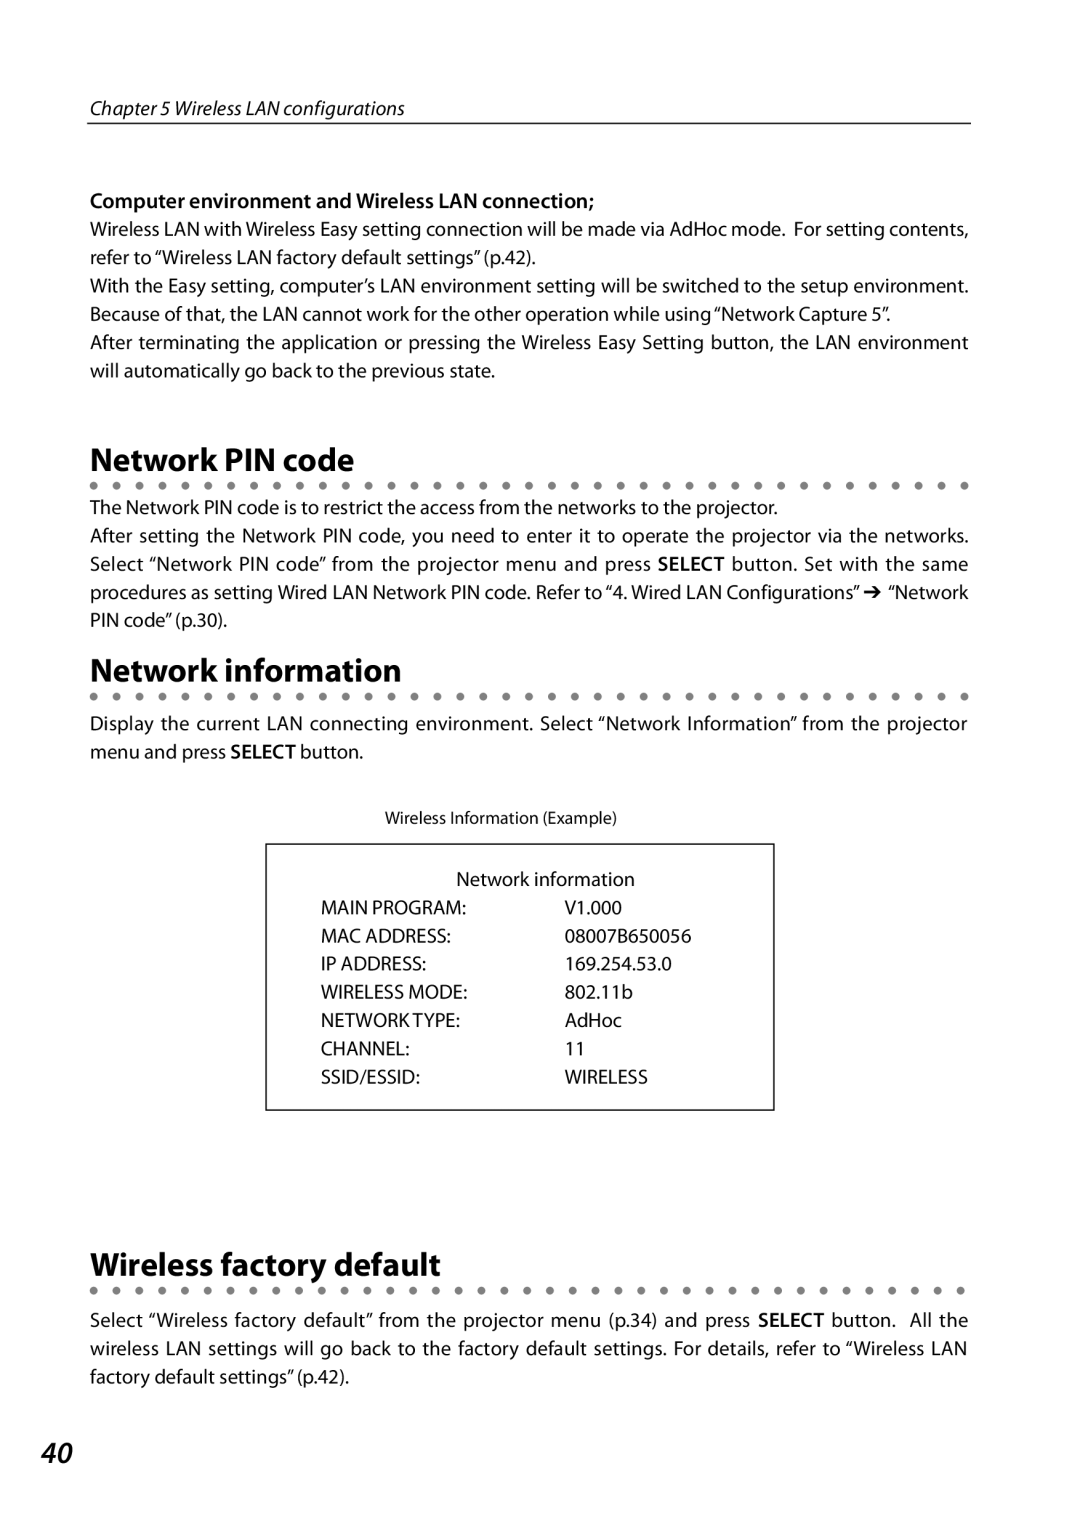 Sanyo PLCXL51 owner manual Wireless factory default, Computer environment and Wireless LAN connection, Network PIN code 